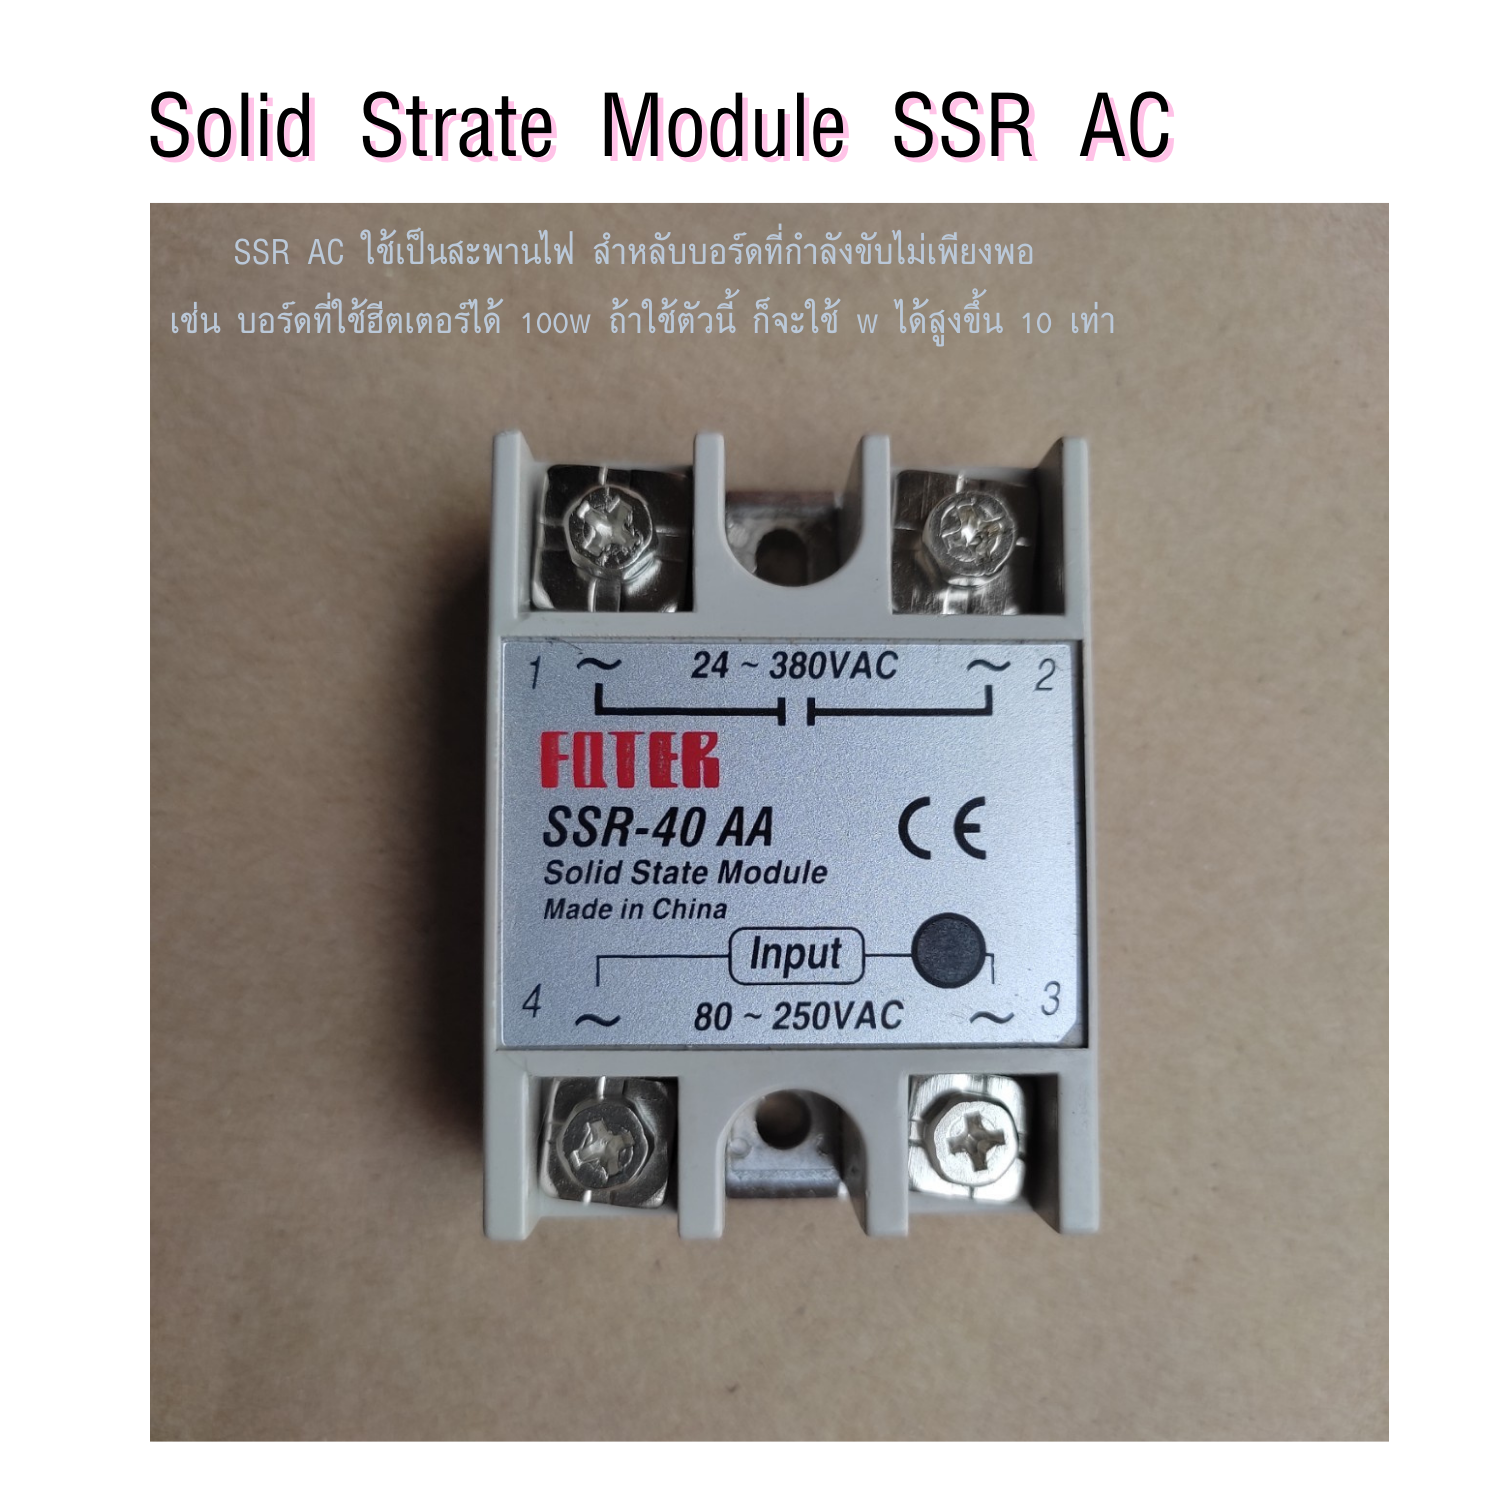 Solid Strate Module SSR AC